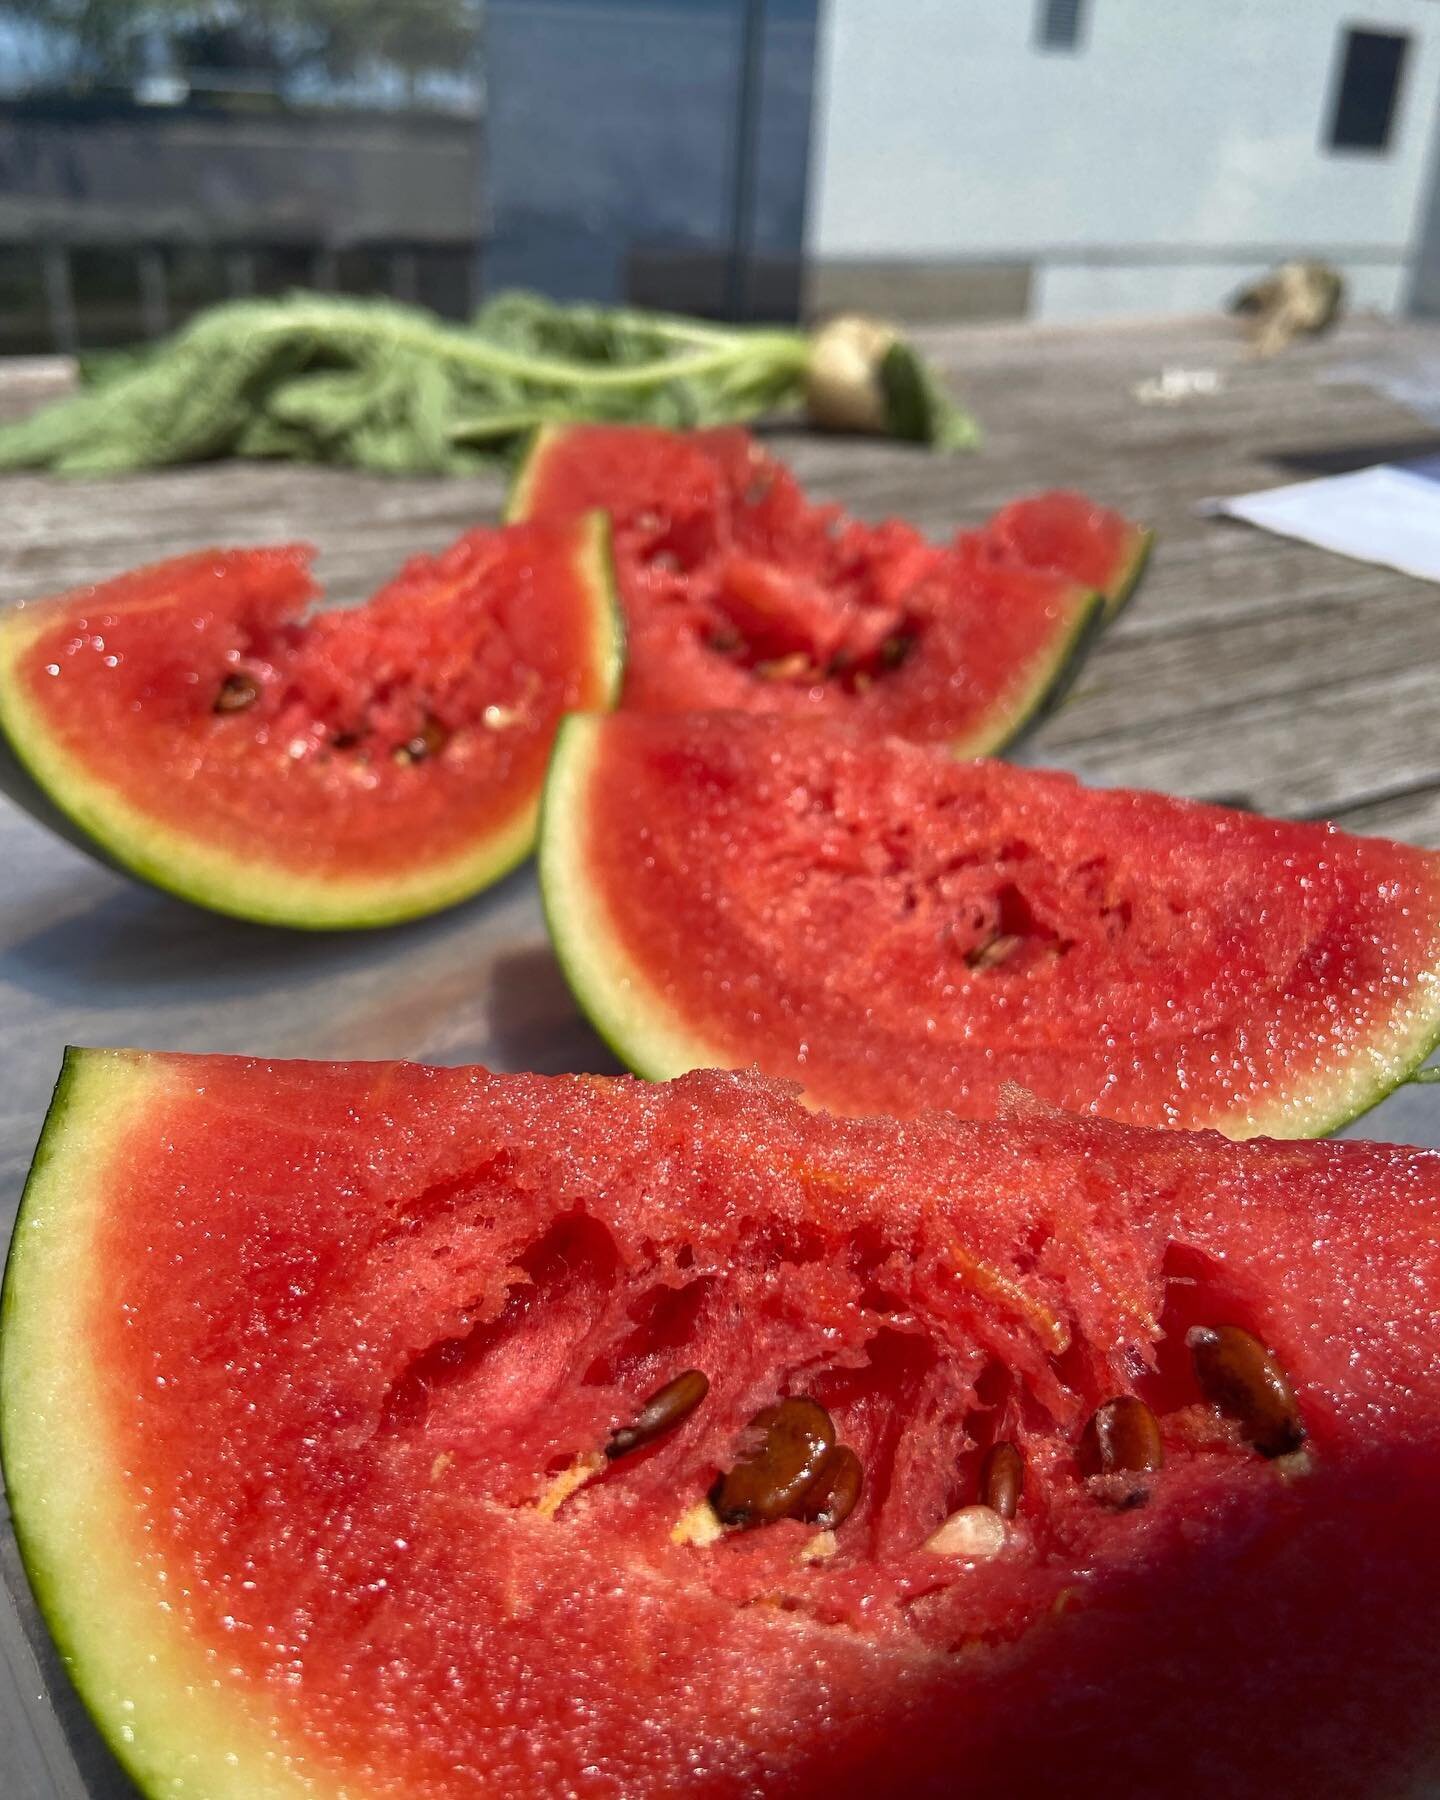 Hydroponic watermelon again this 2022 season at our Farm Amenity location @denizen.bshwk 

Our farmers grow food and memories with the residents at our Farm Amenity locations. 

People love farms where they live. Green Food Solutions is helping farme